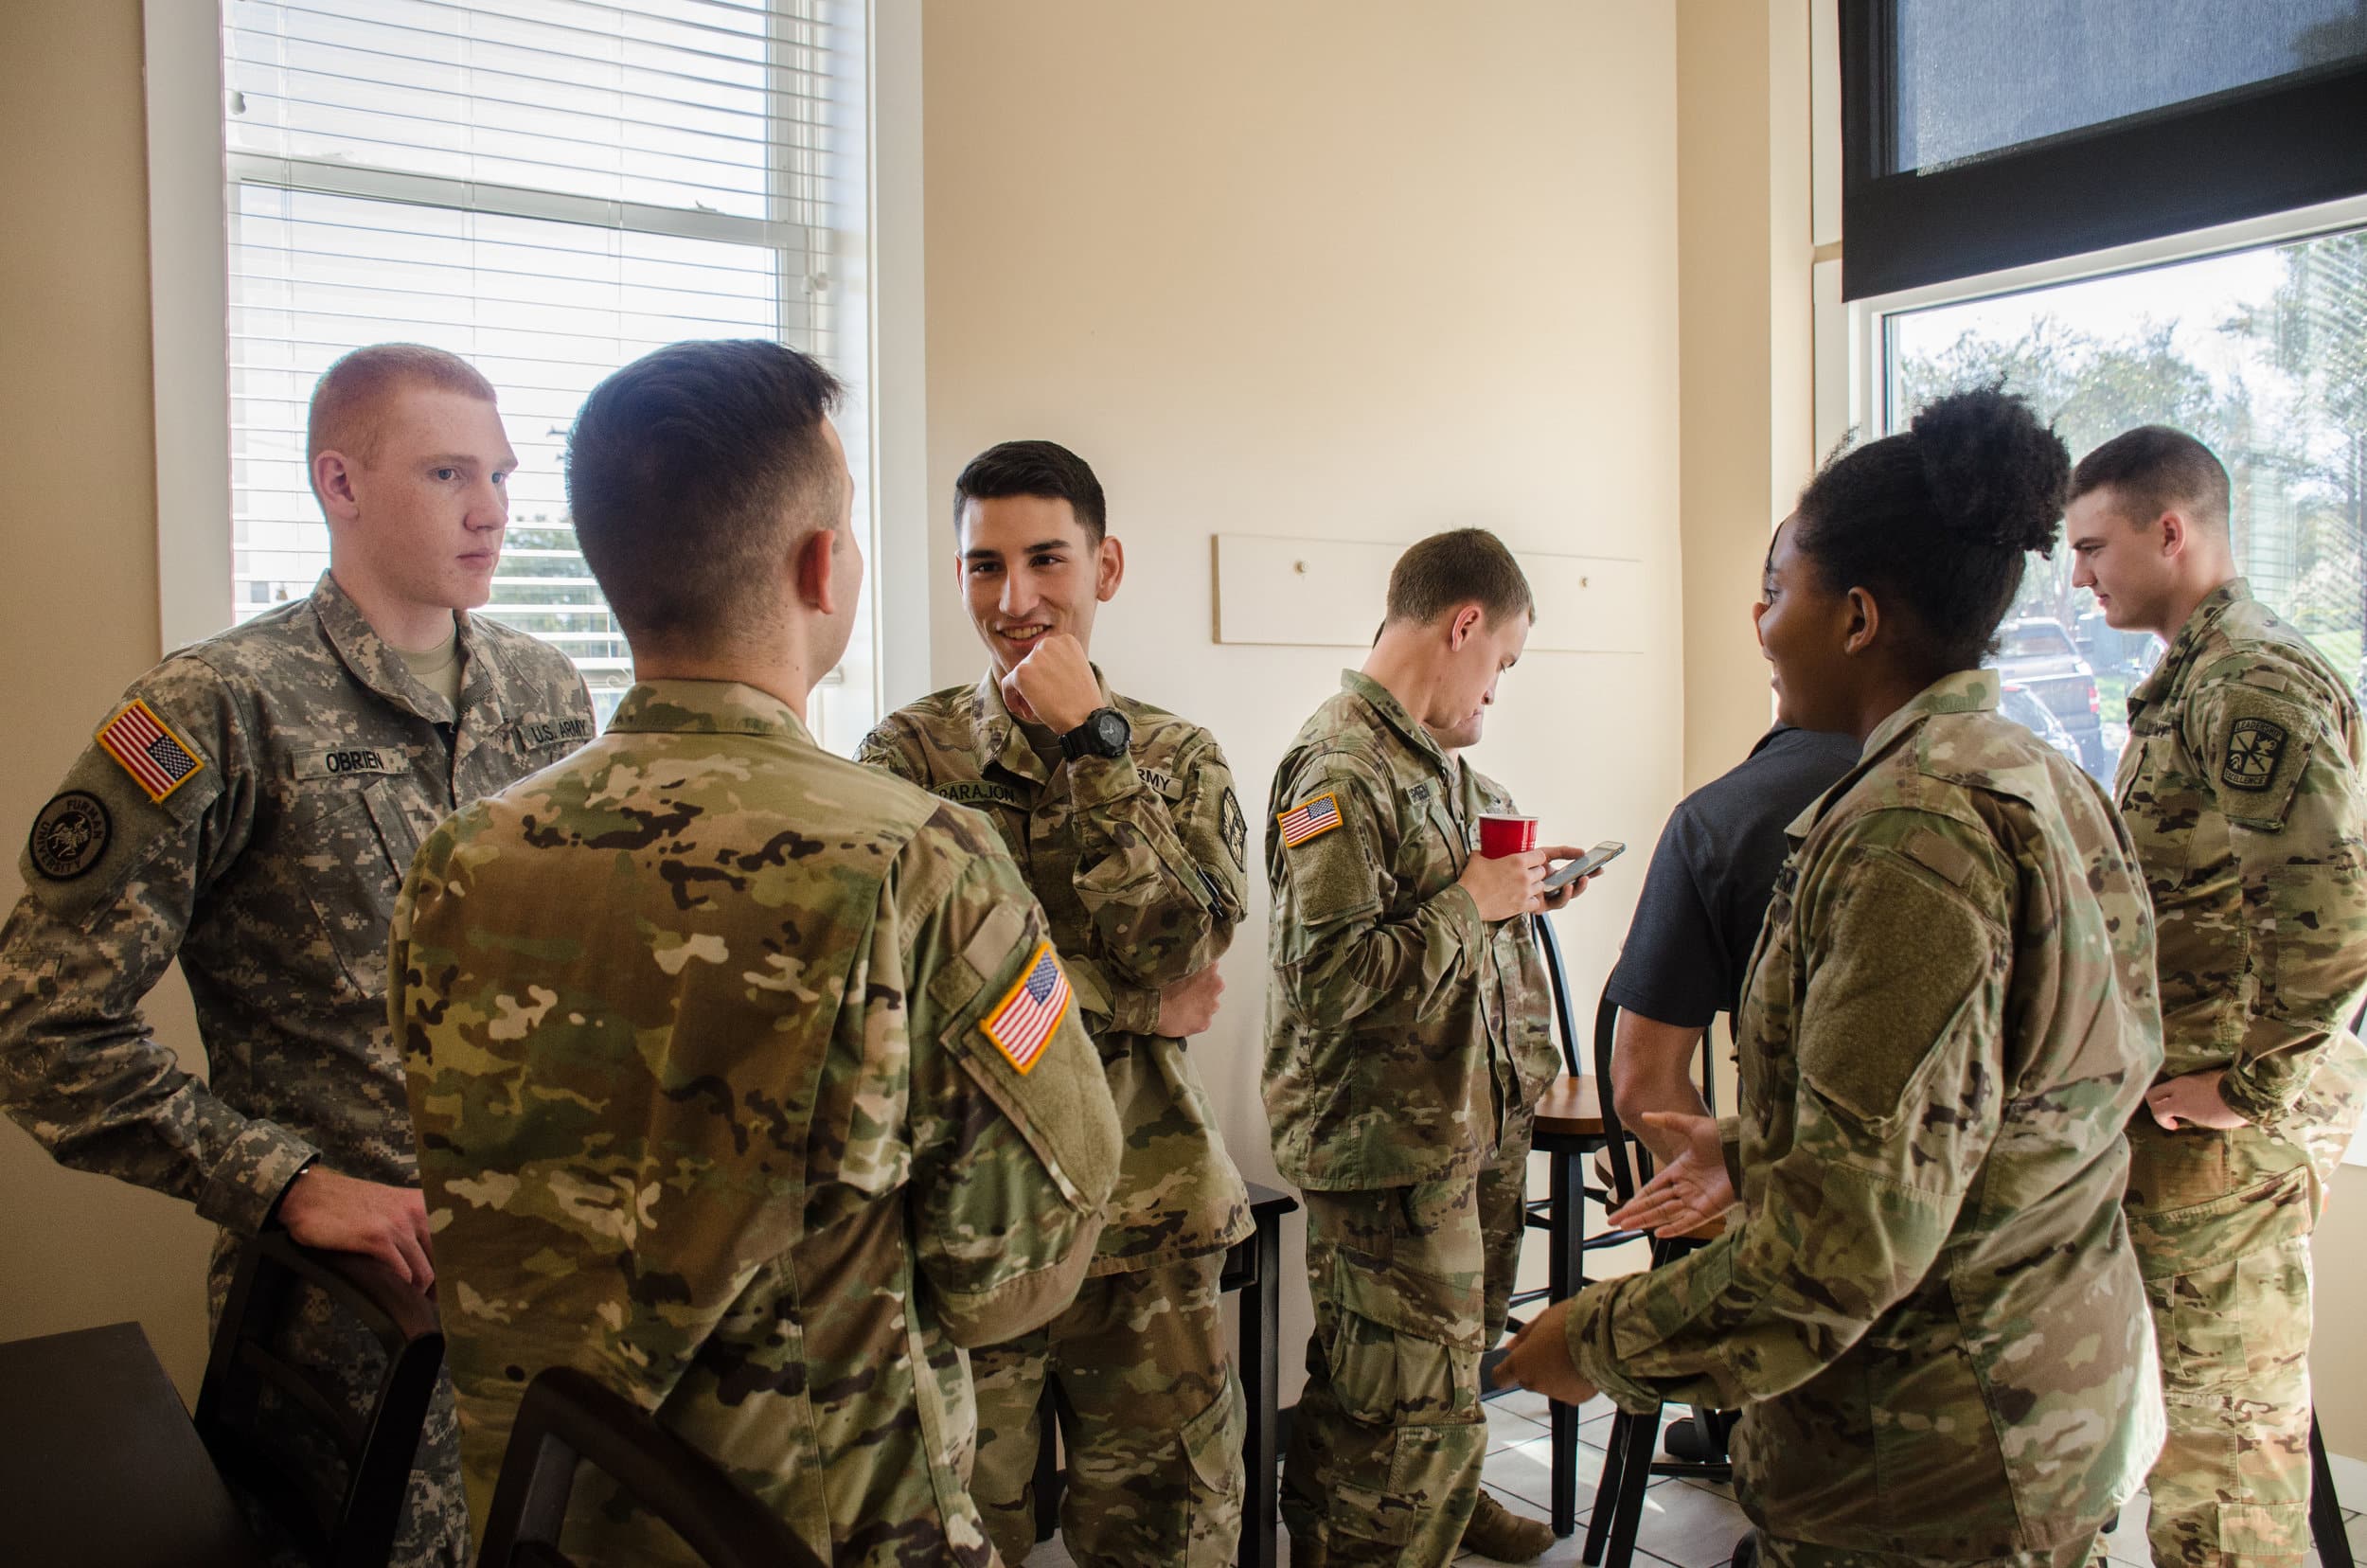 Both NGU and Furman students come together to celebrate the opening of the new ROTC building.